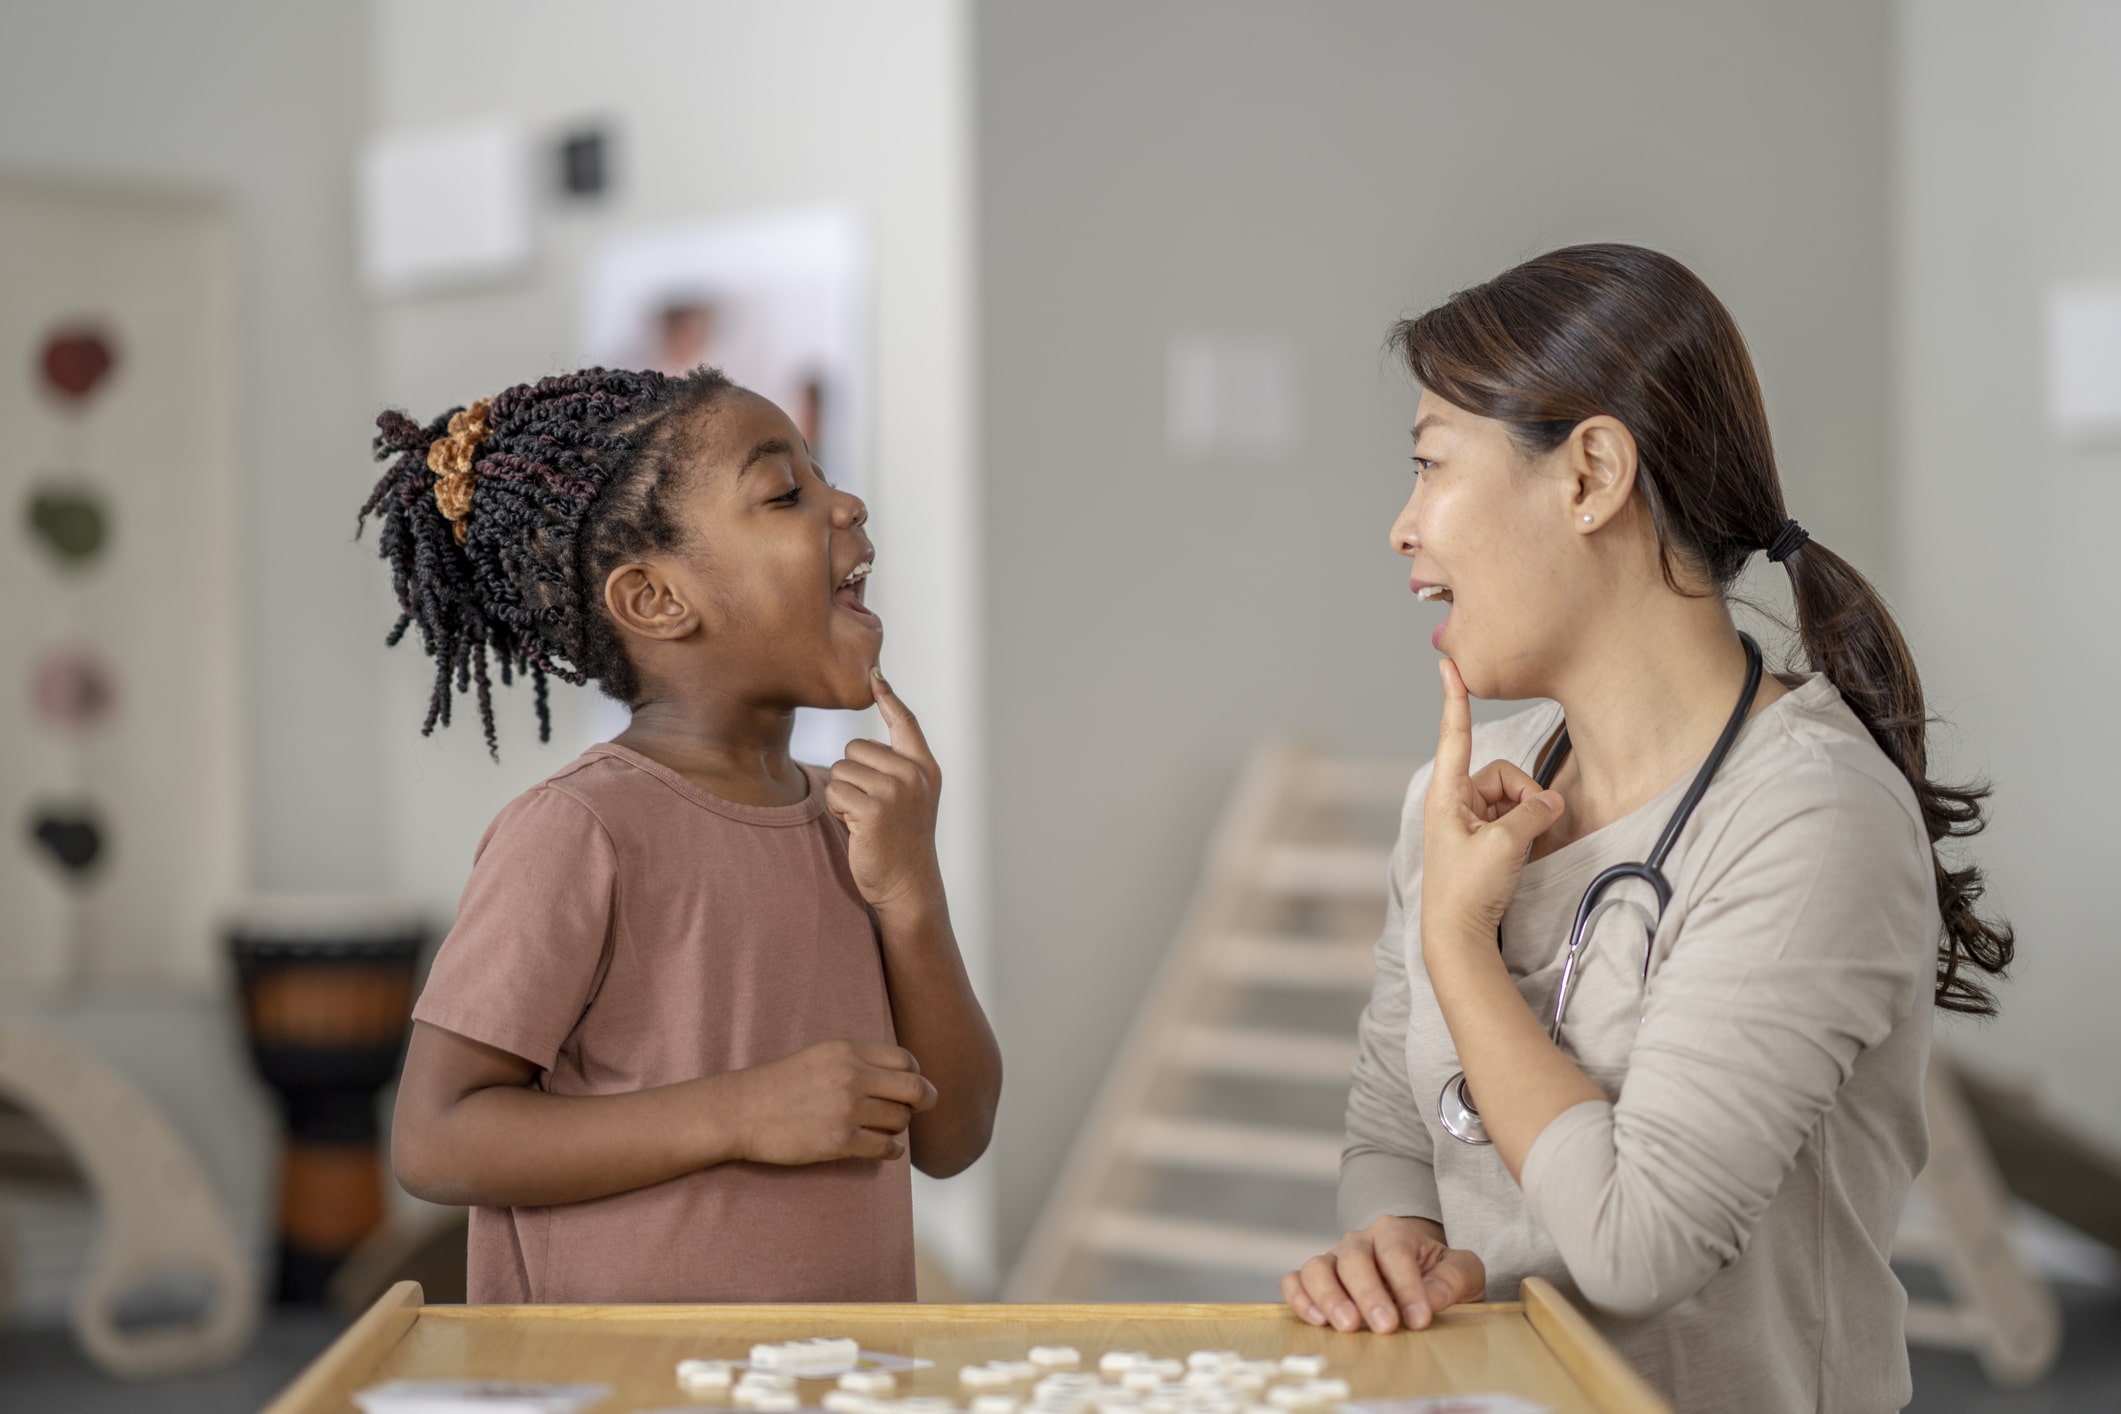 how much can a speech therapist earn